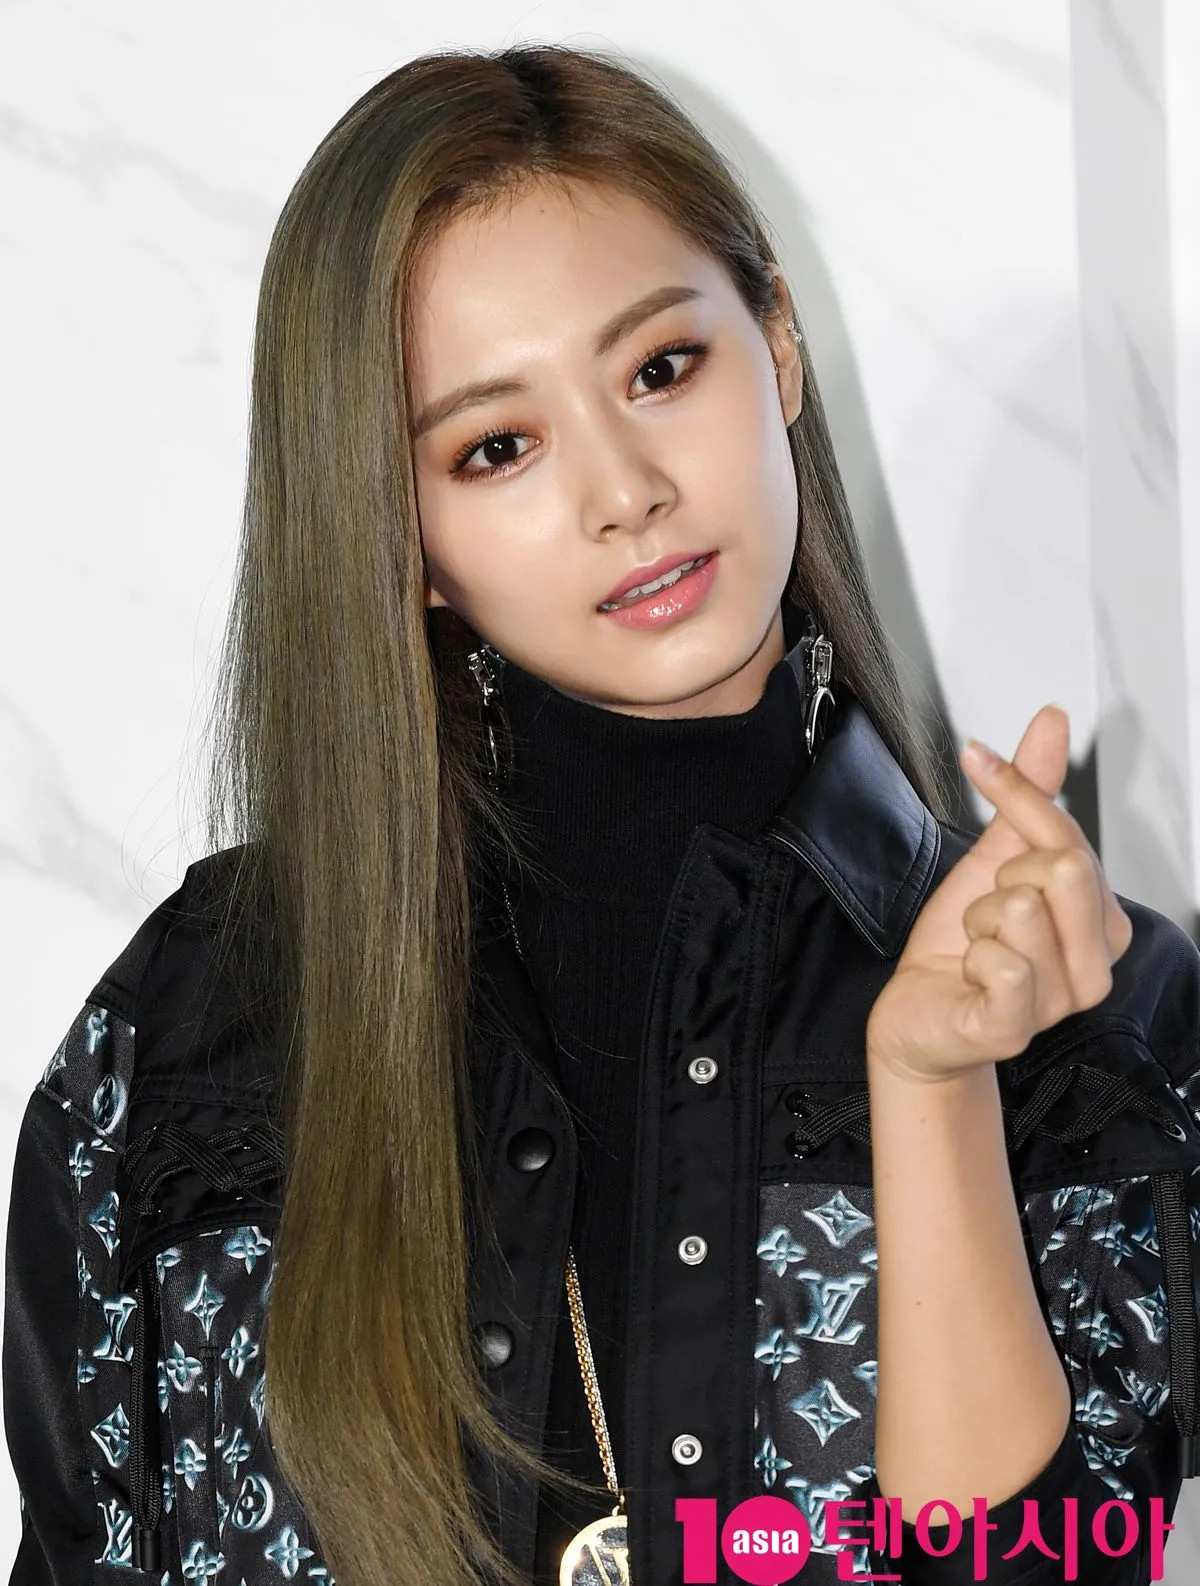 Louis Vuitton Handbag that TWICE's Tzuyu Used during Recent Fashion Event  is Sold Out